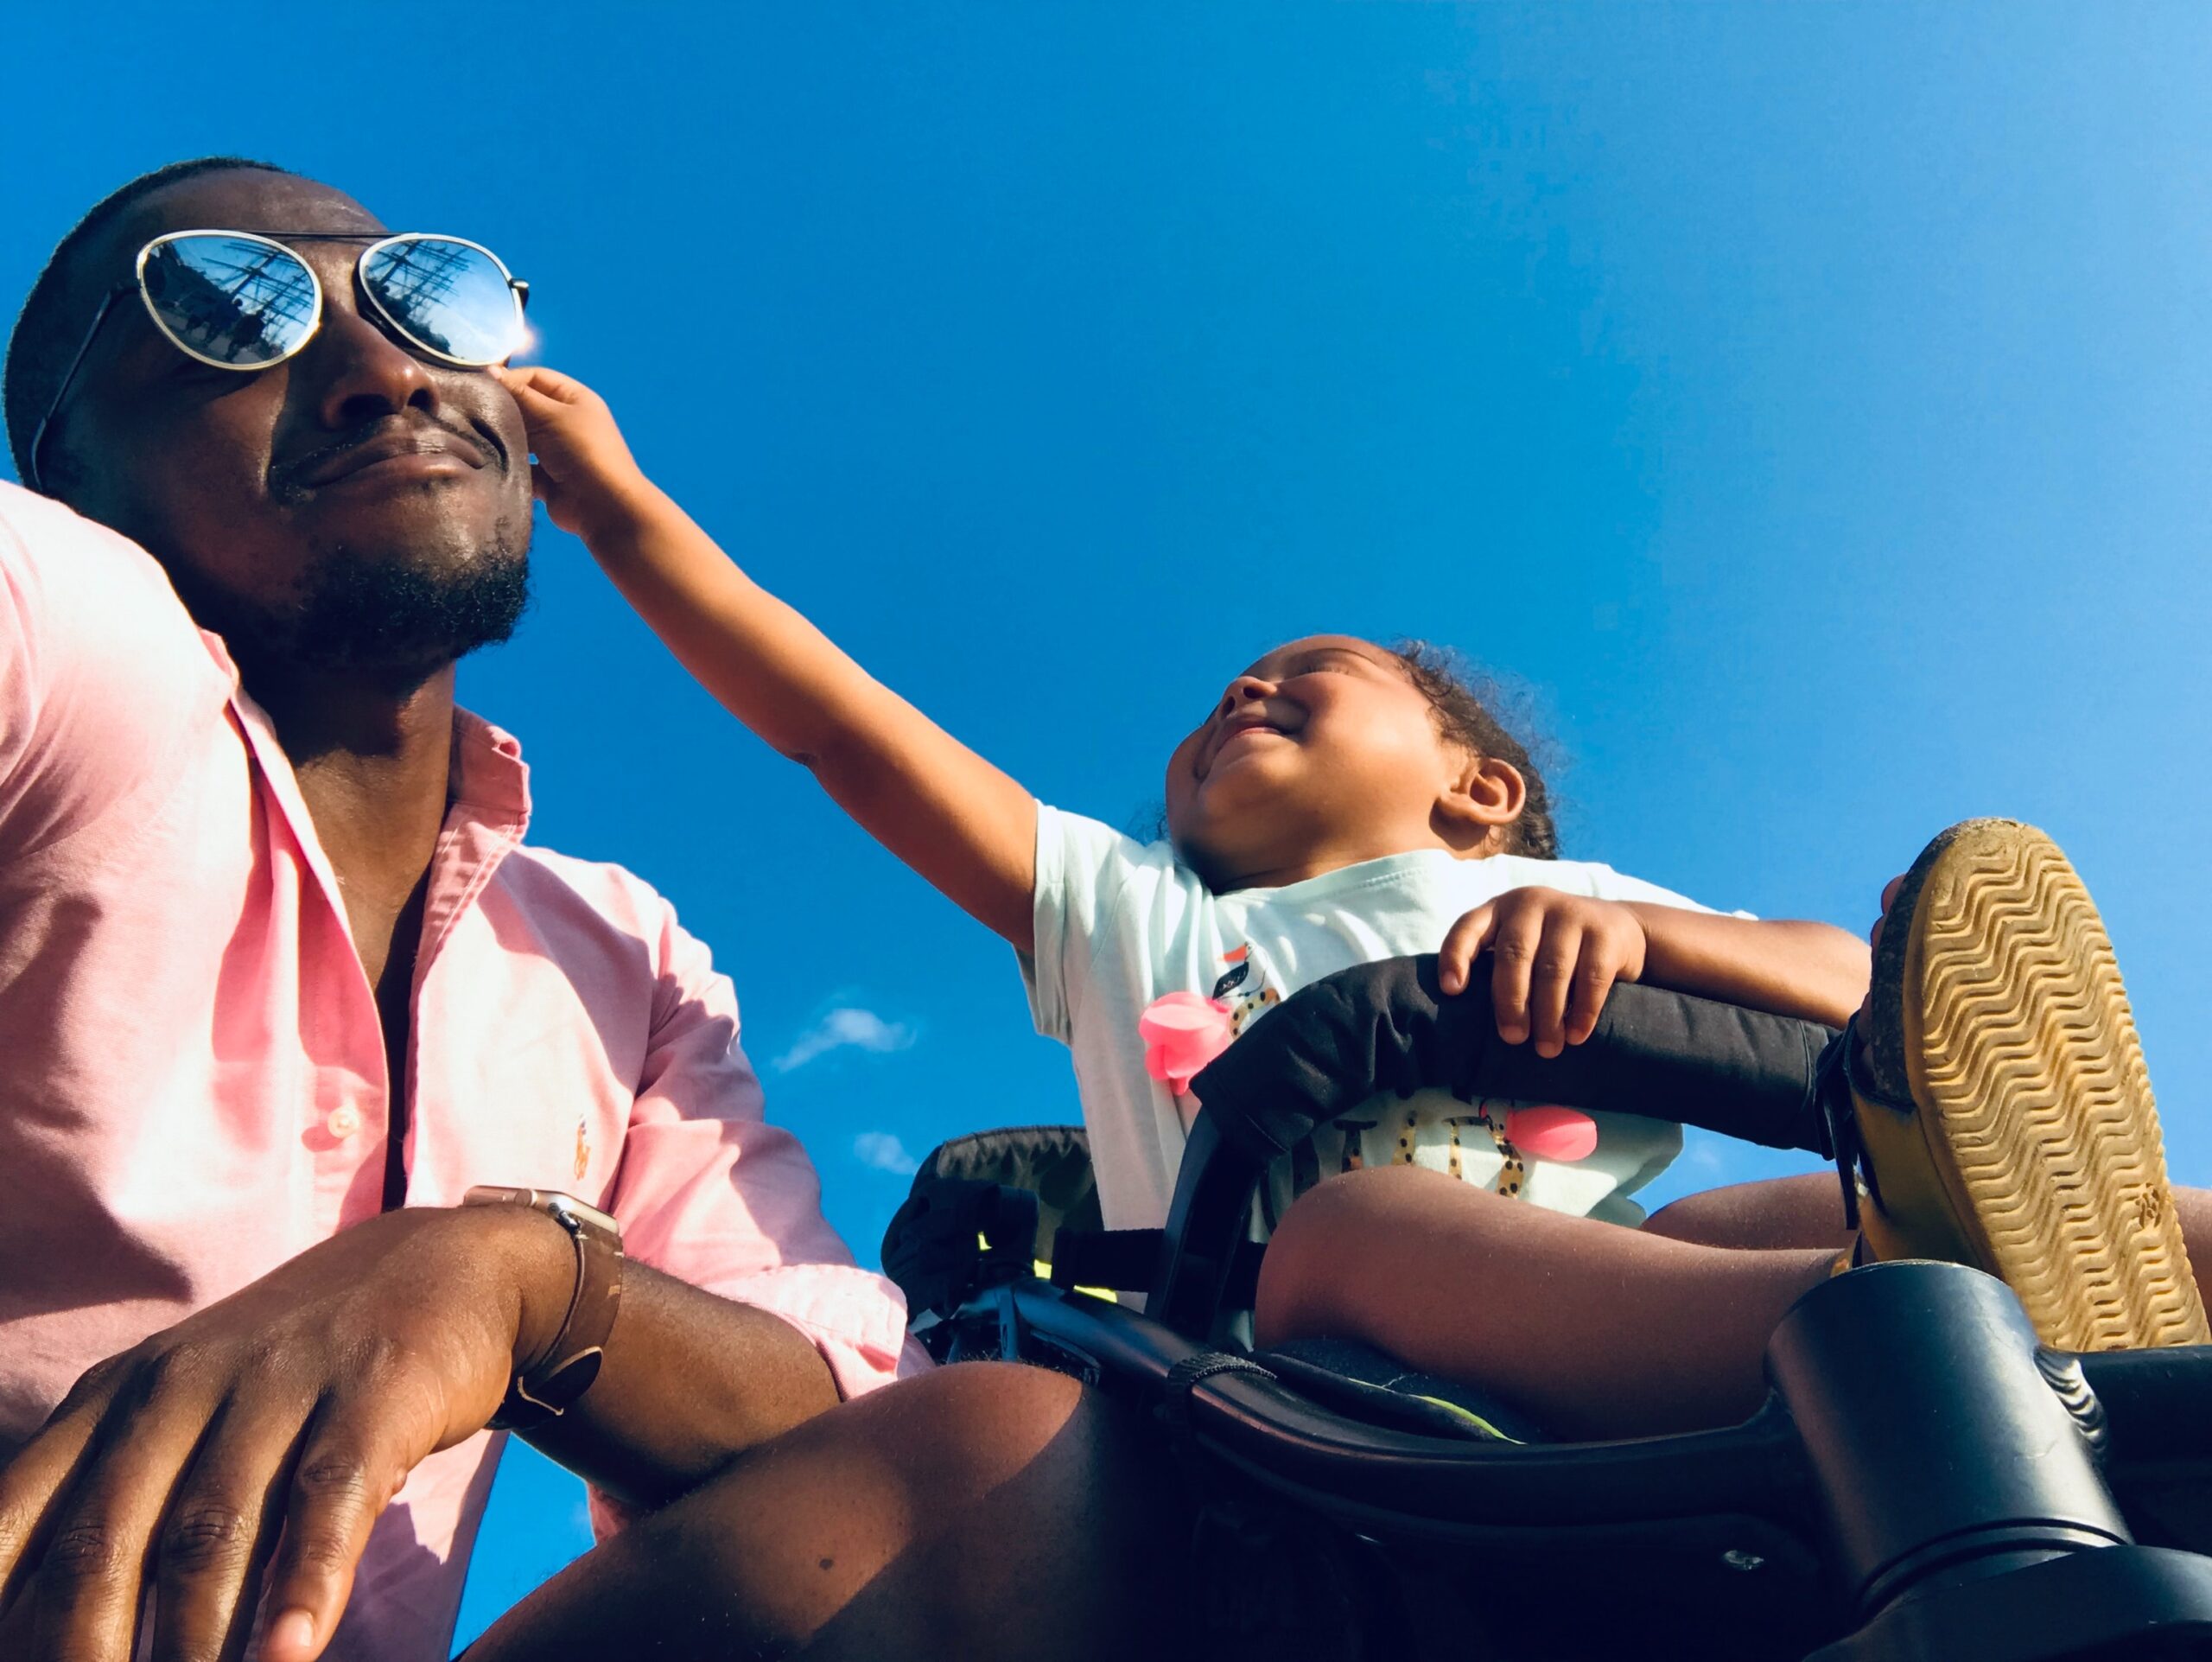 black child reaching for sunglasses on their father's face